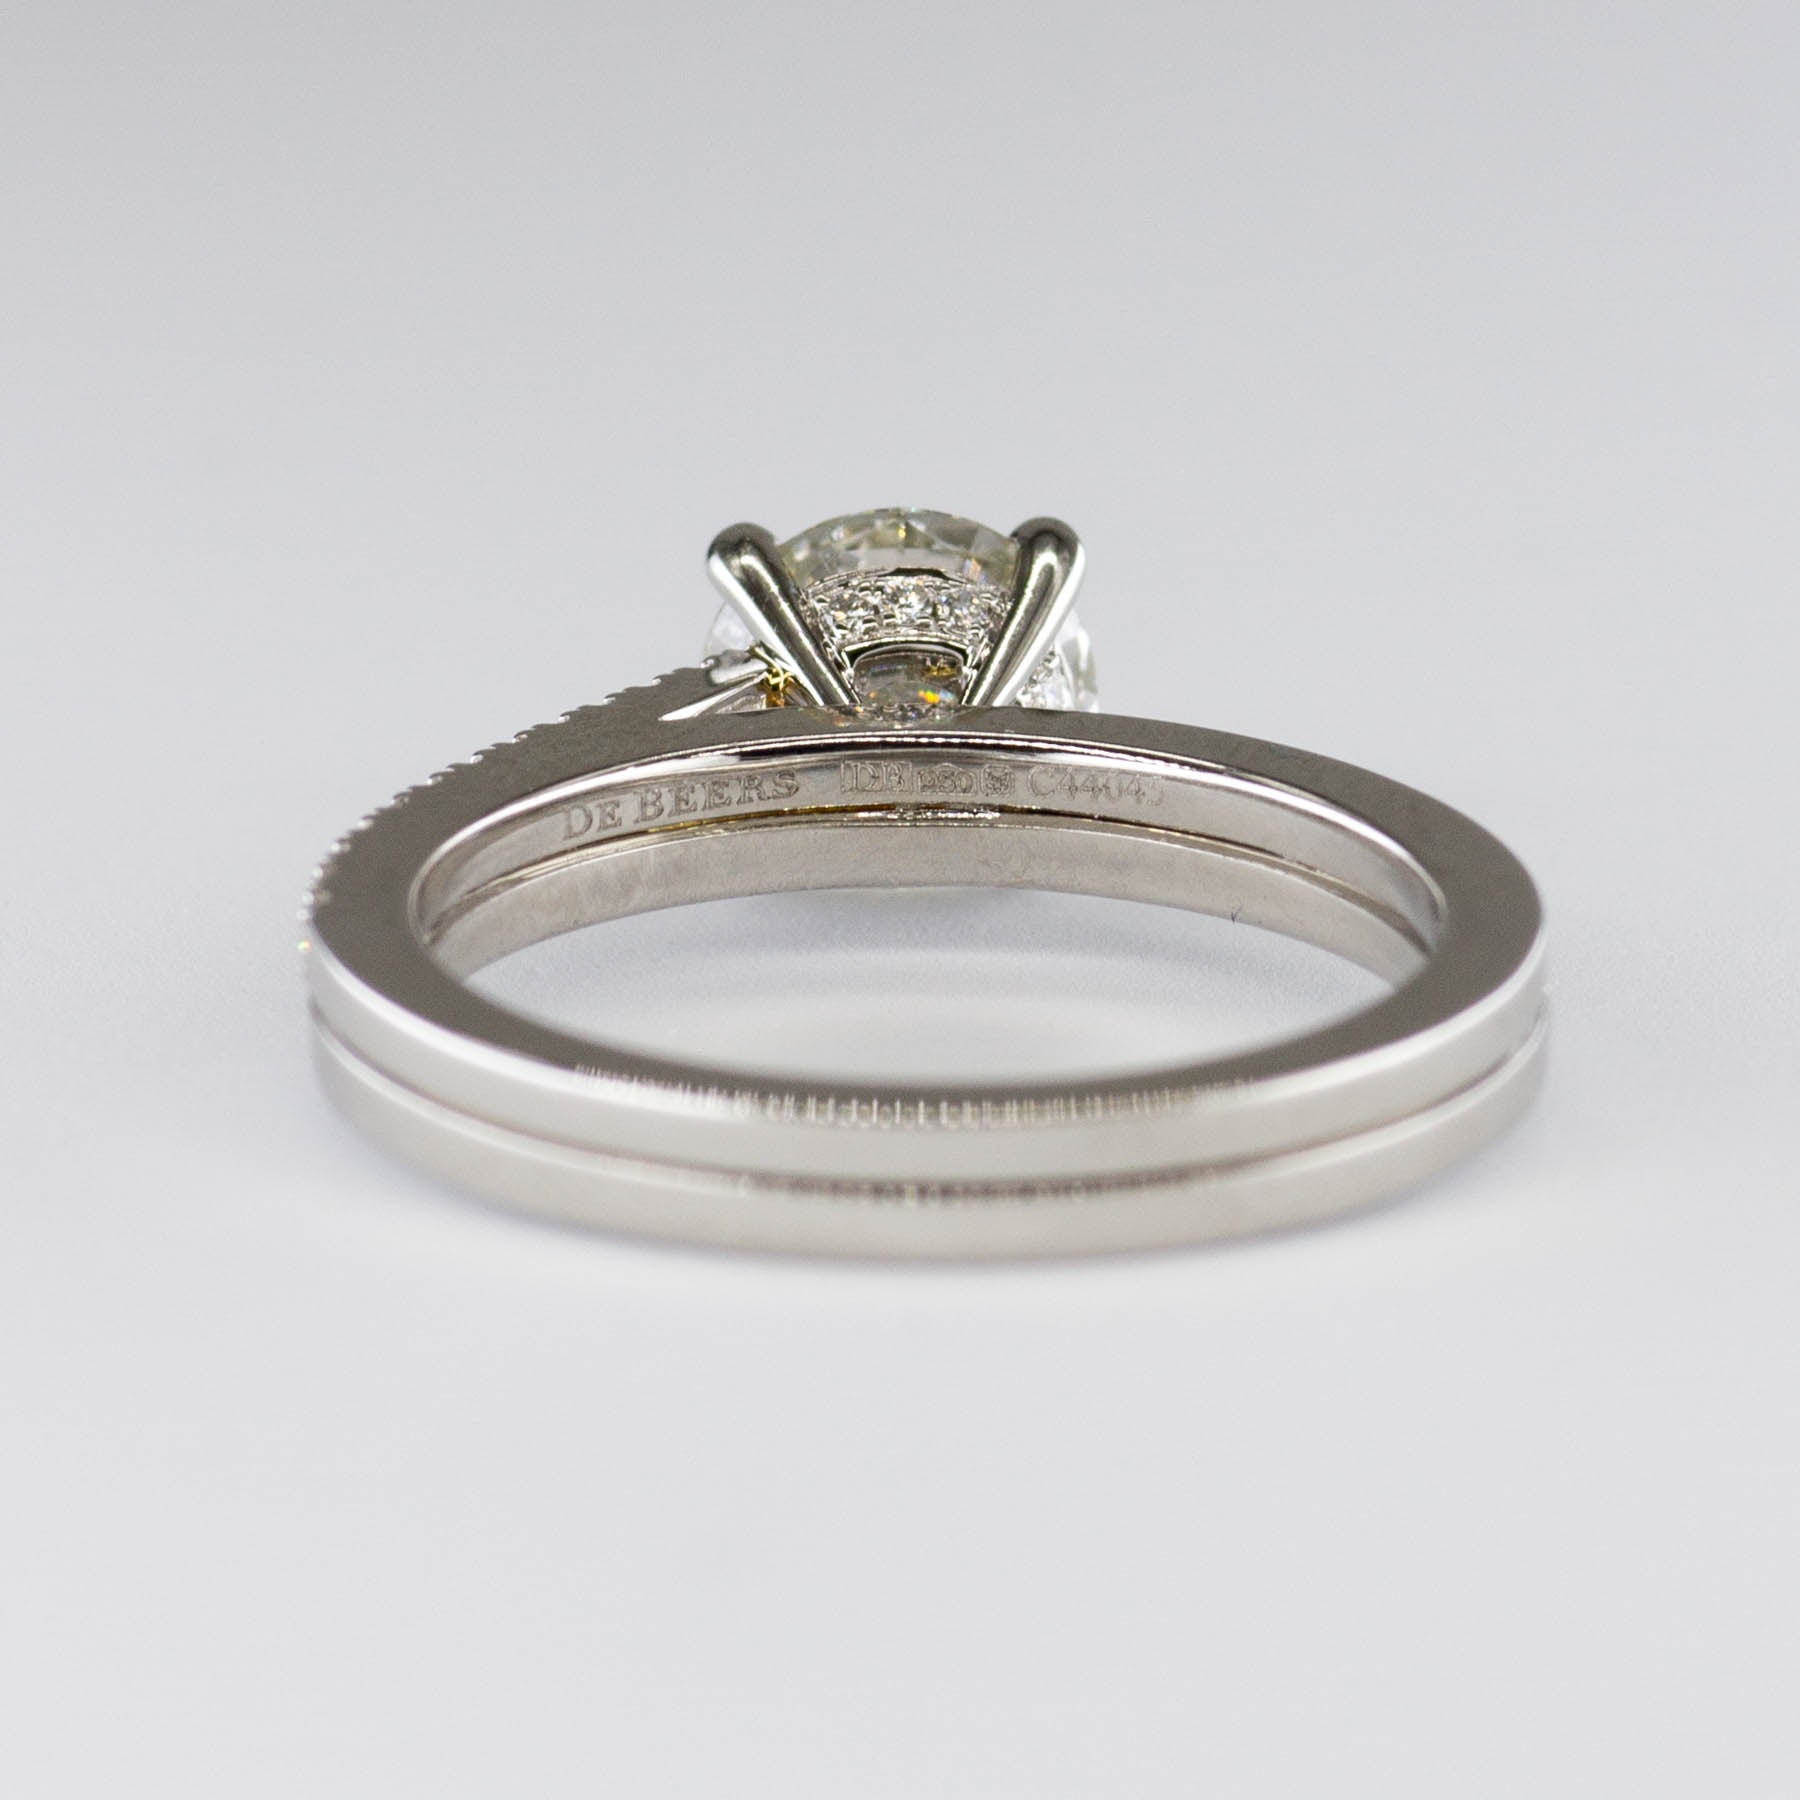 Michael Hill Solitaire Engagement Ring with a 0.70 Carat TW Diamond with  the De Beers Code of Origin in Platinum | Shop Midtown